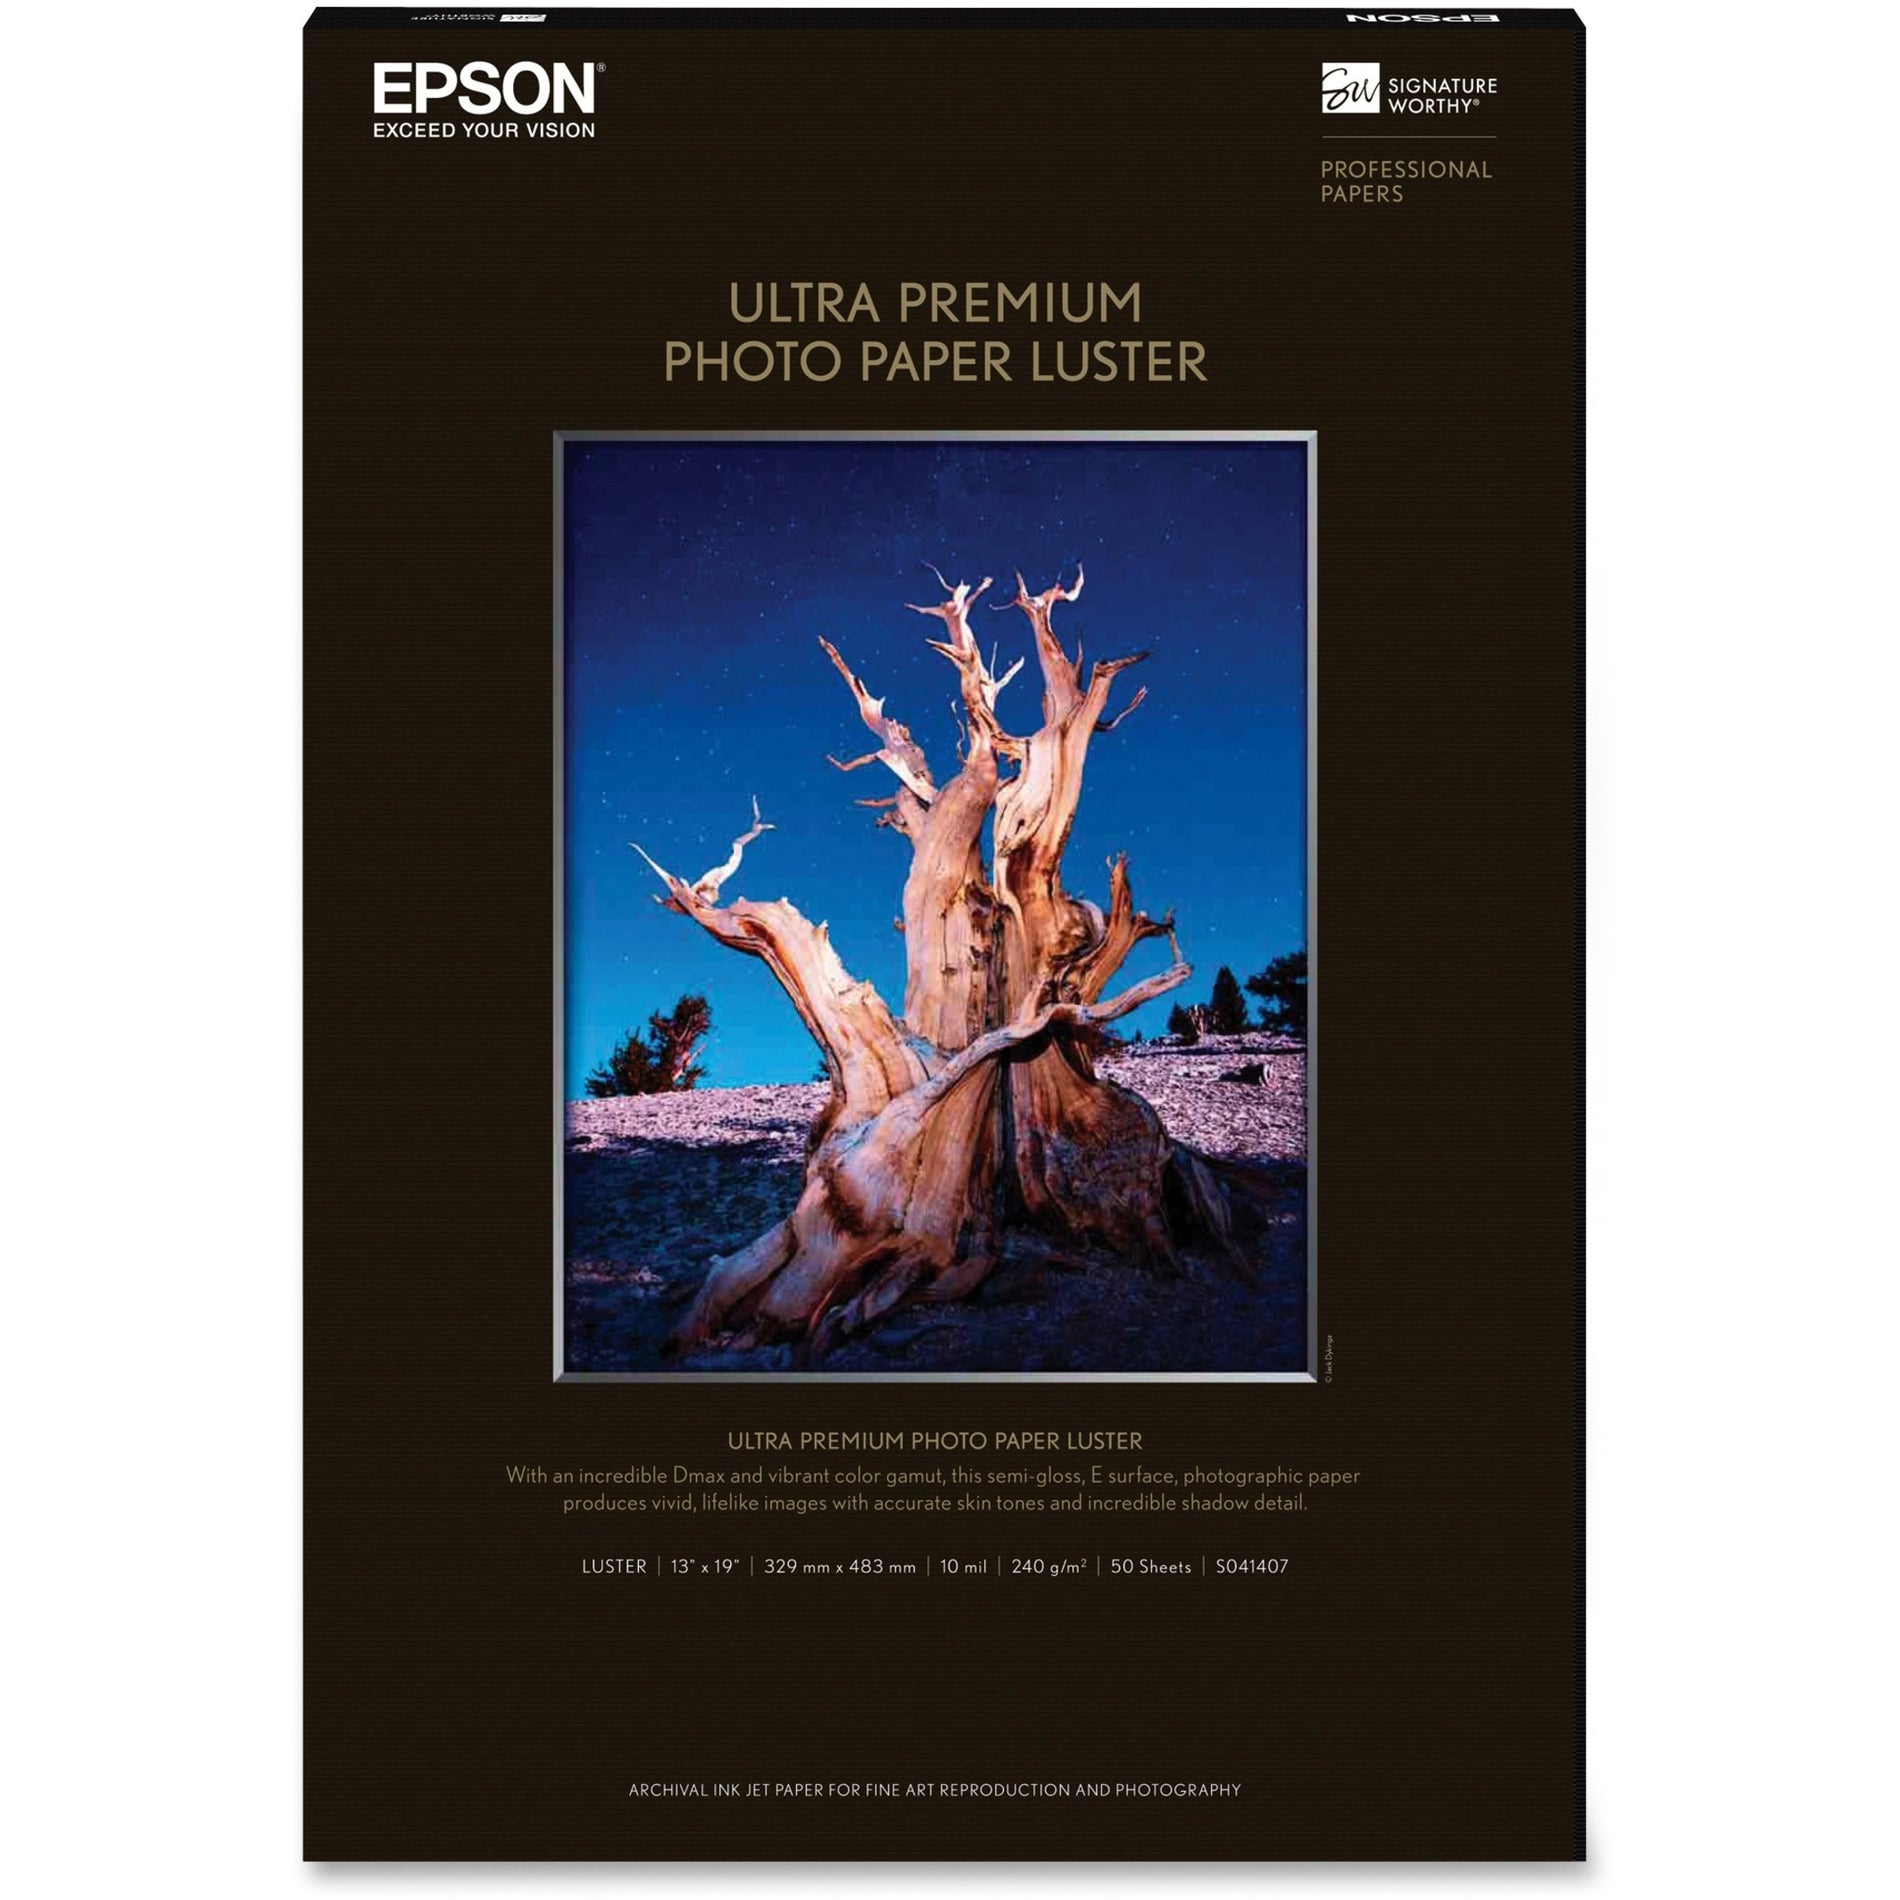 Epson S041407 Ultra Premium Luster Photo Paper, 13"x19", 50 Sheets, 10 mil Thickness